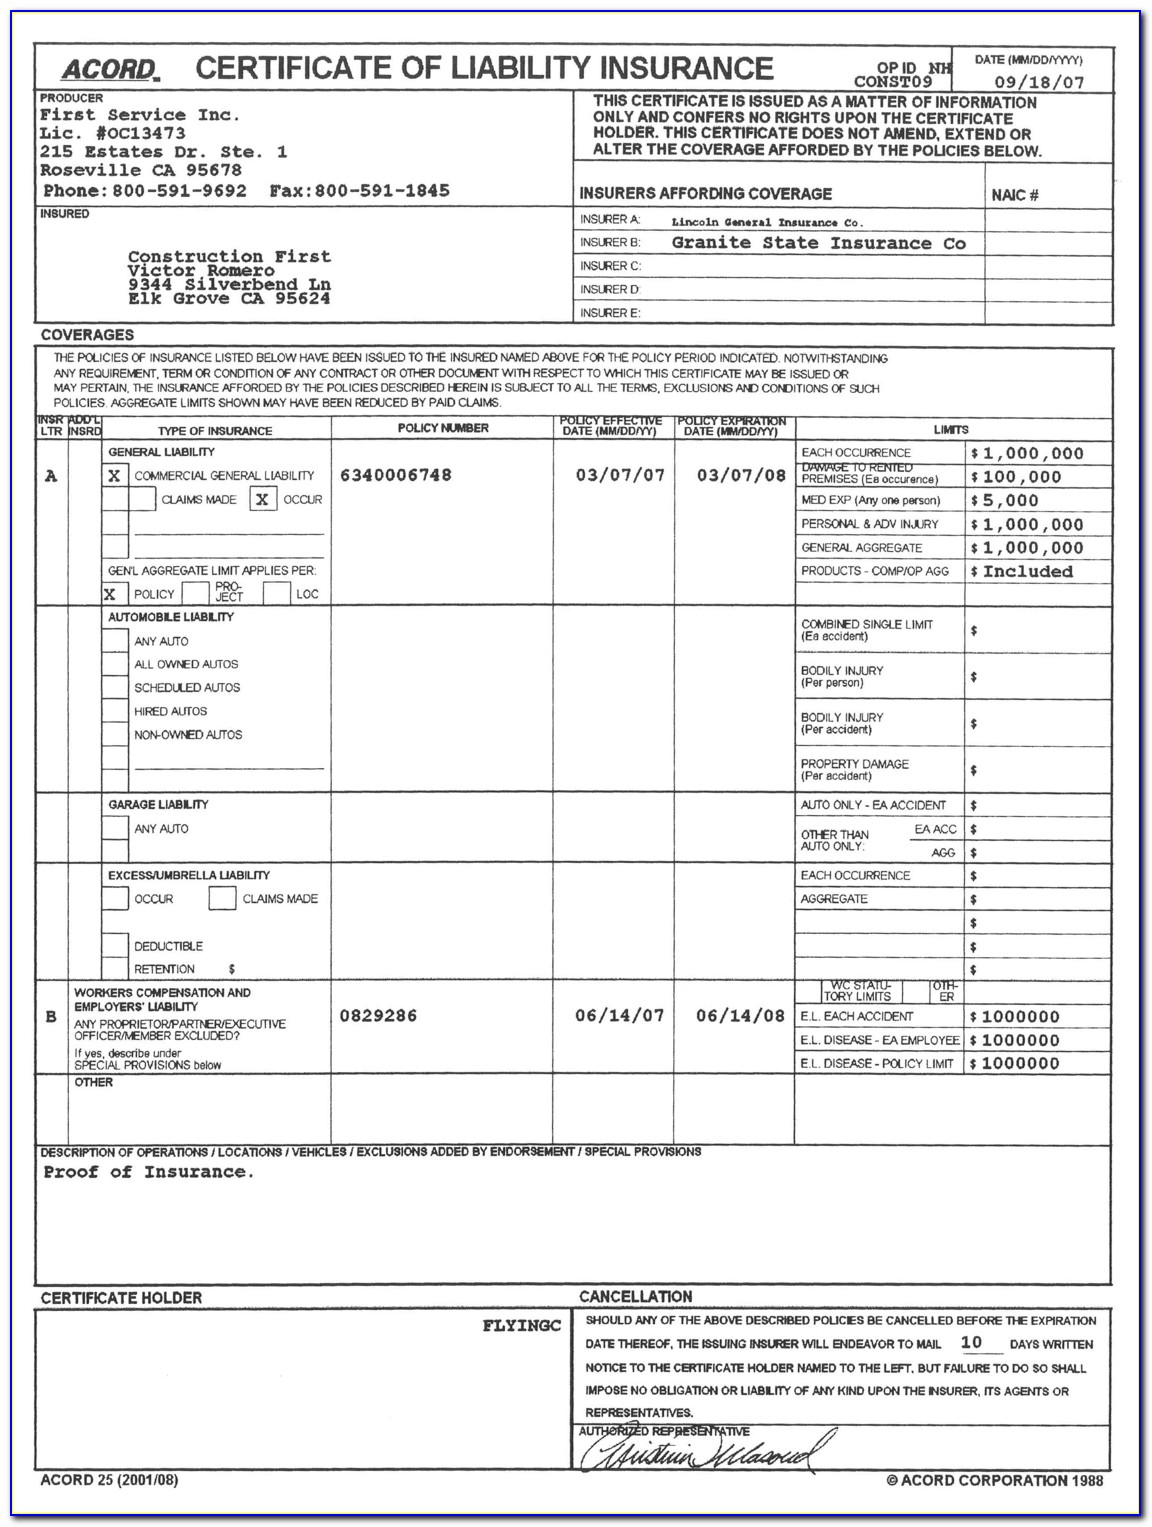 Acord Certificate Of Liability Insurance Form 2016